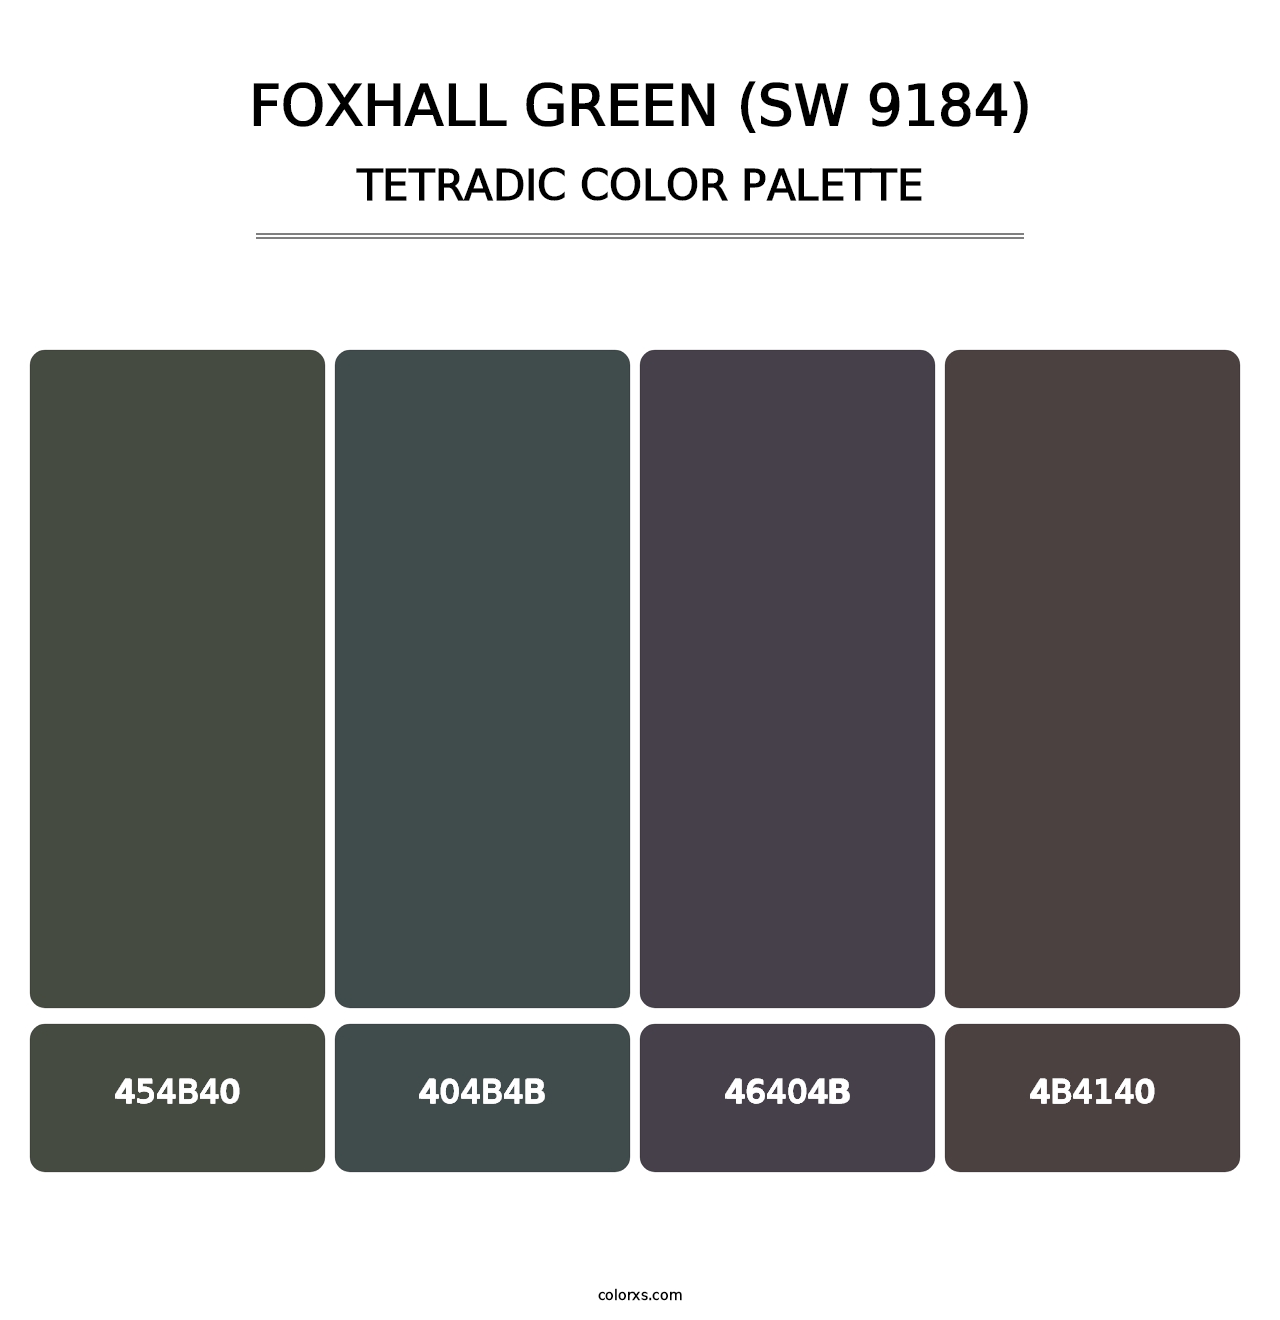 Foxhall Green (SW 9184) - Tetradic Color Palette